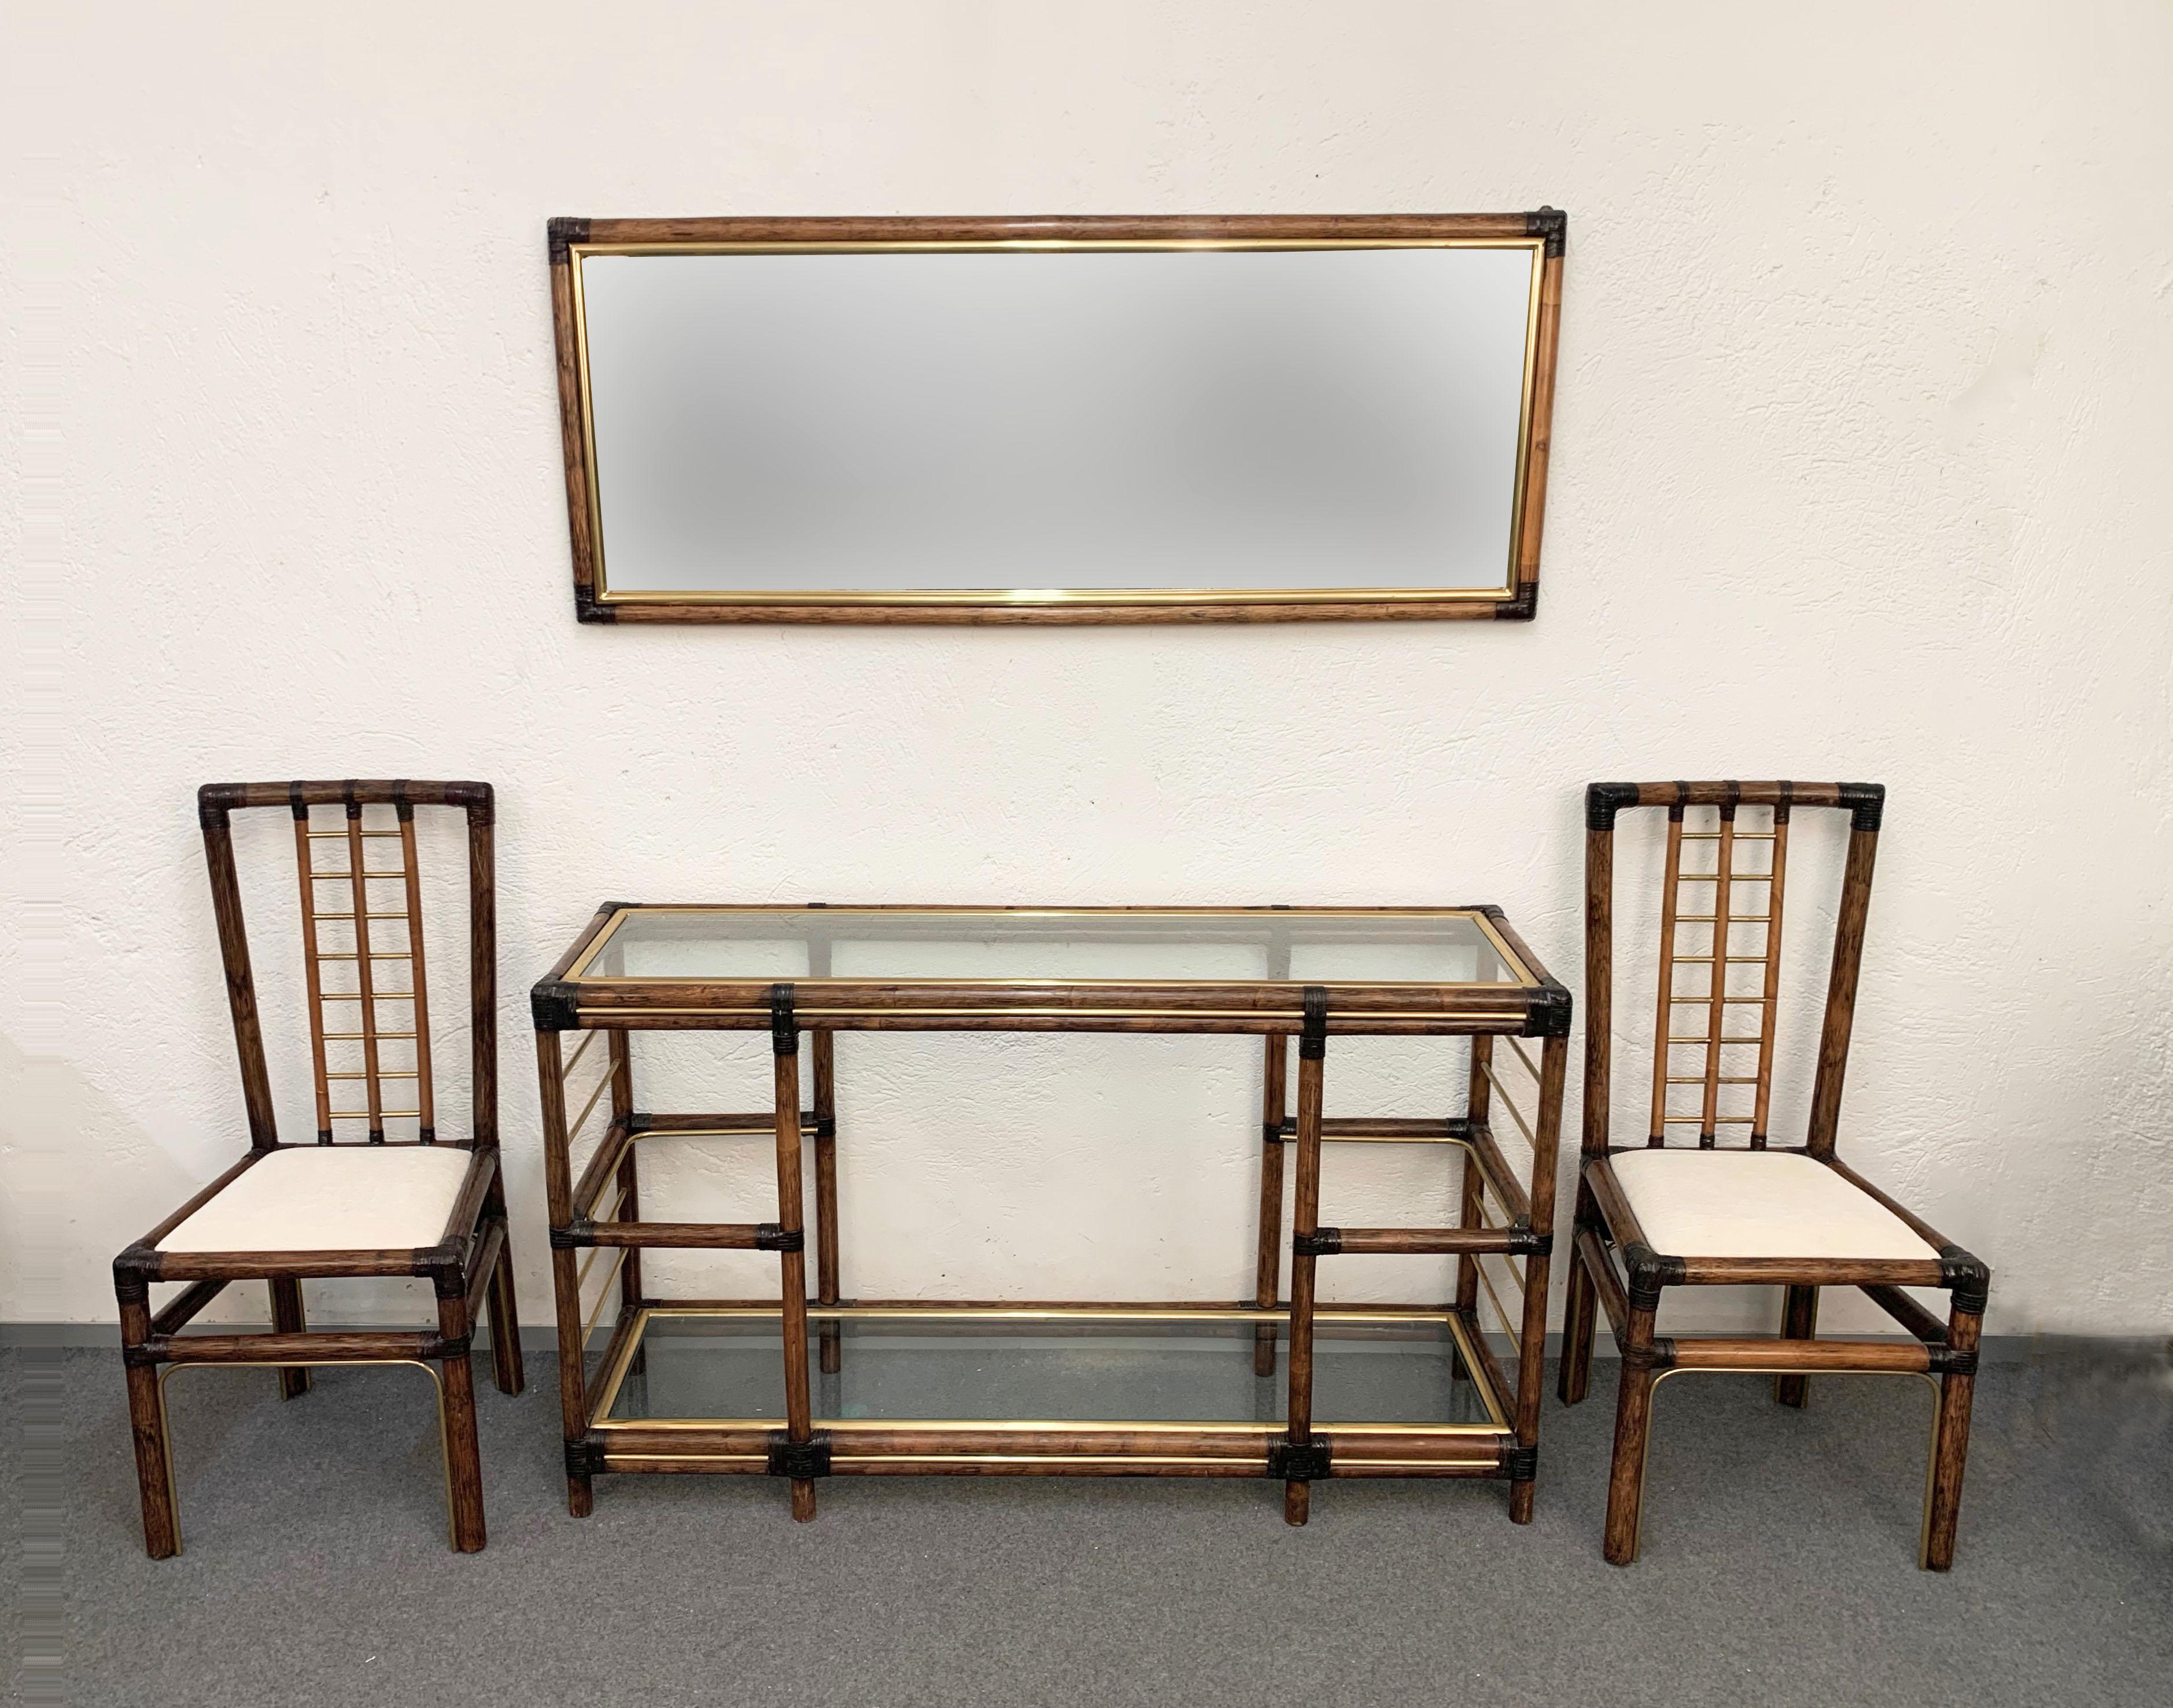 Wonderful bamboo and brass midcentury entrance hall set. This incredible set was produced in Italy during the 1980s.

This amazing set is made of a console table with crystal glass shelves, a wall mirror and a pair of chairs with white fabric